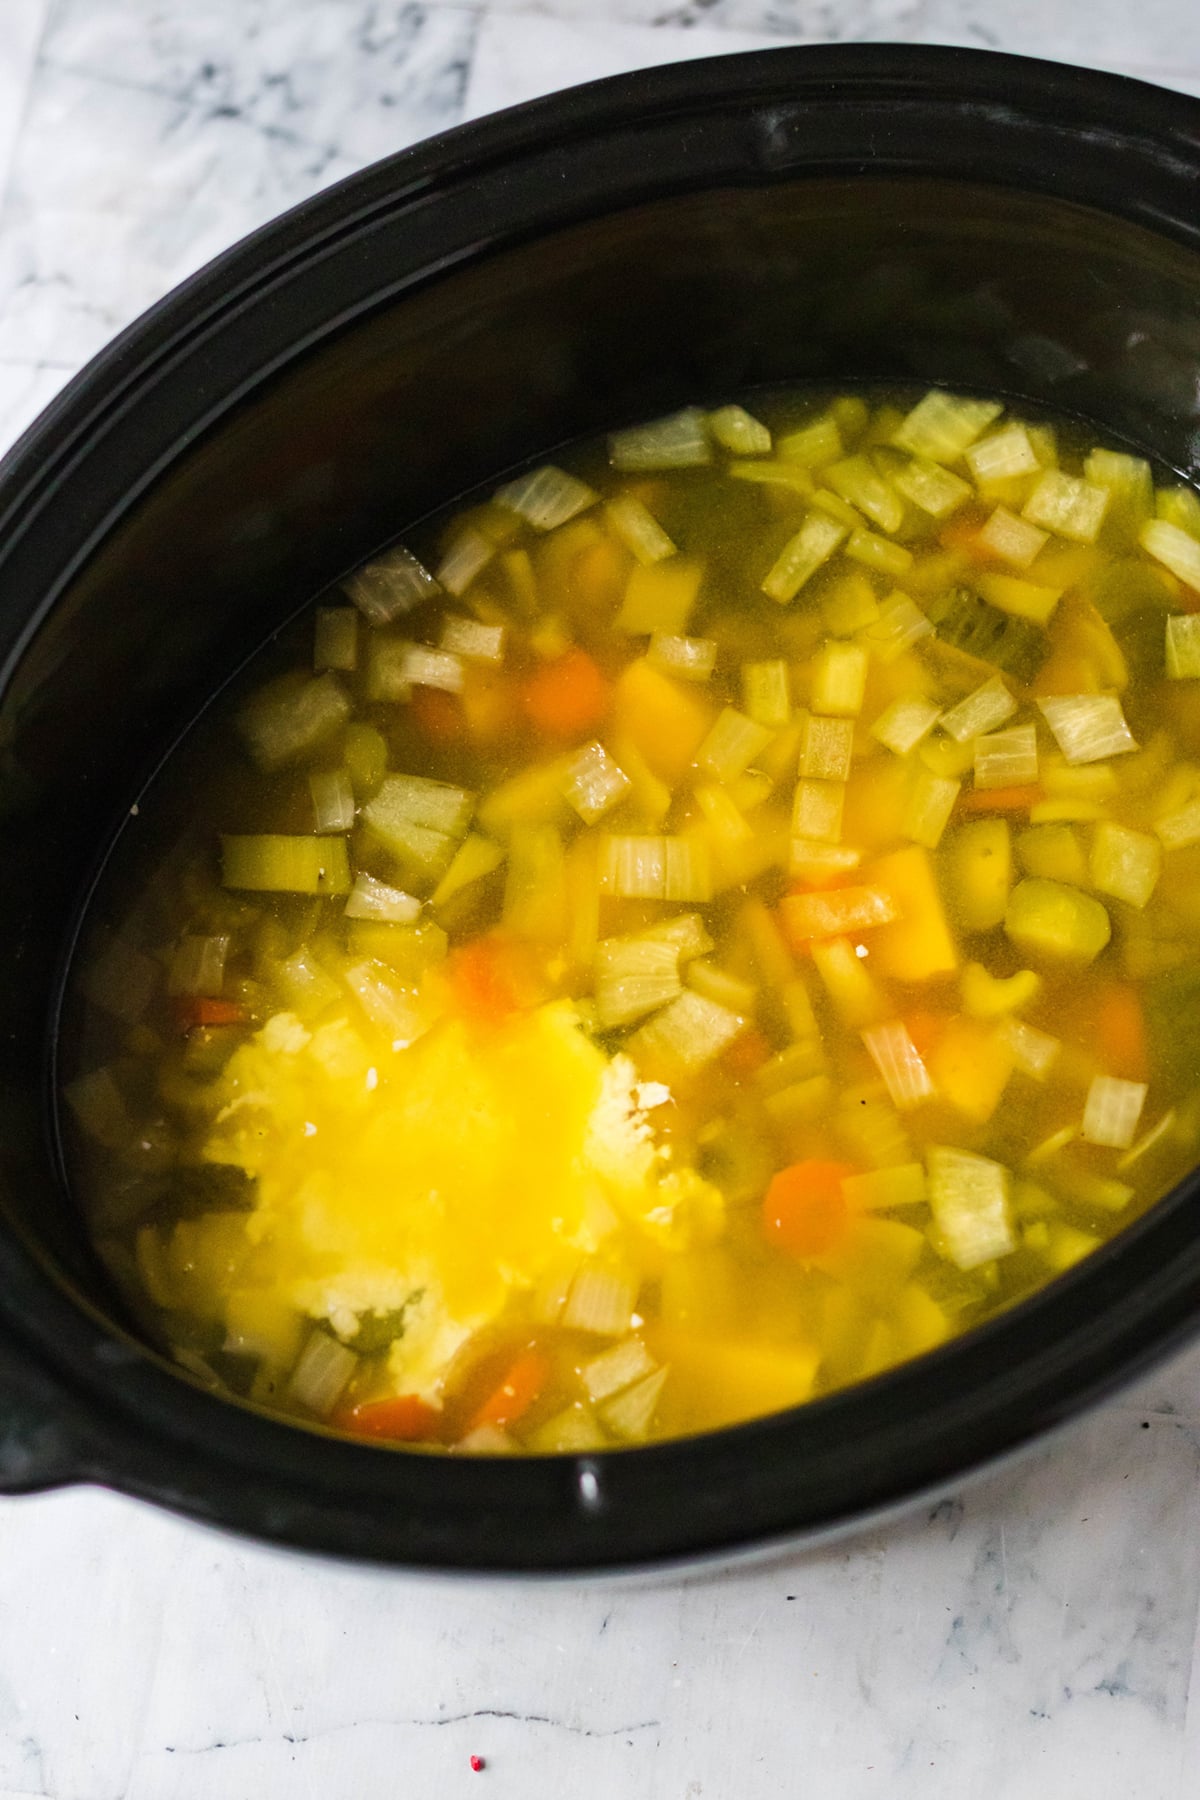 The pot is set to cook, chicken stock is added.